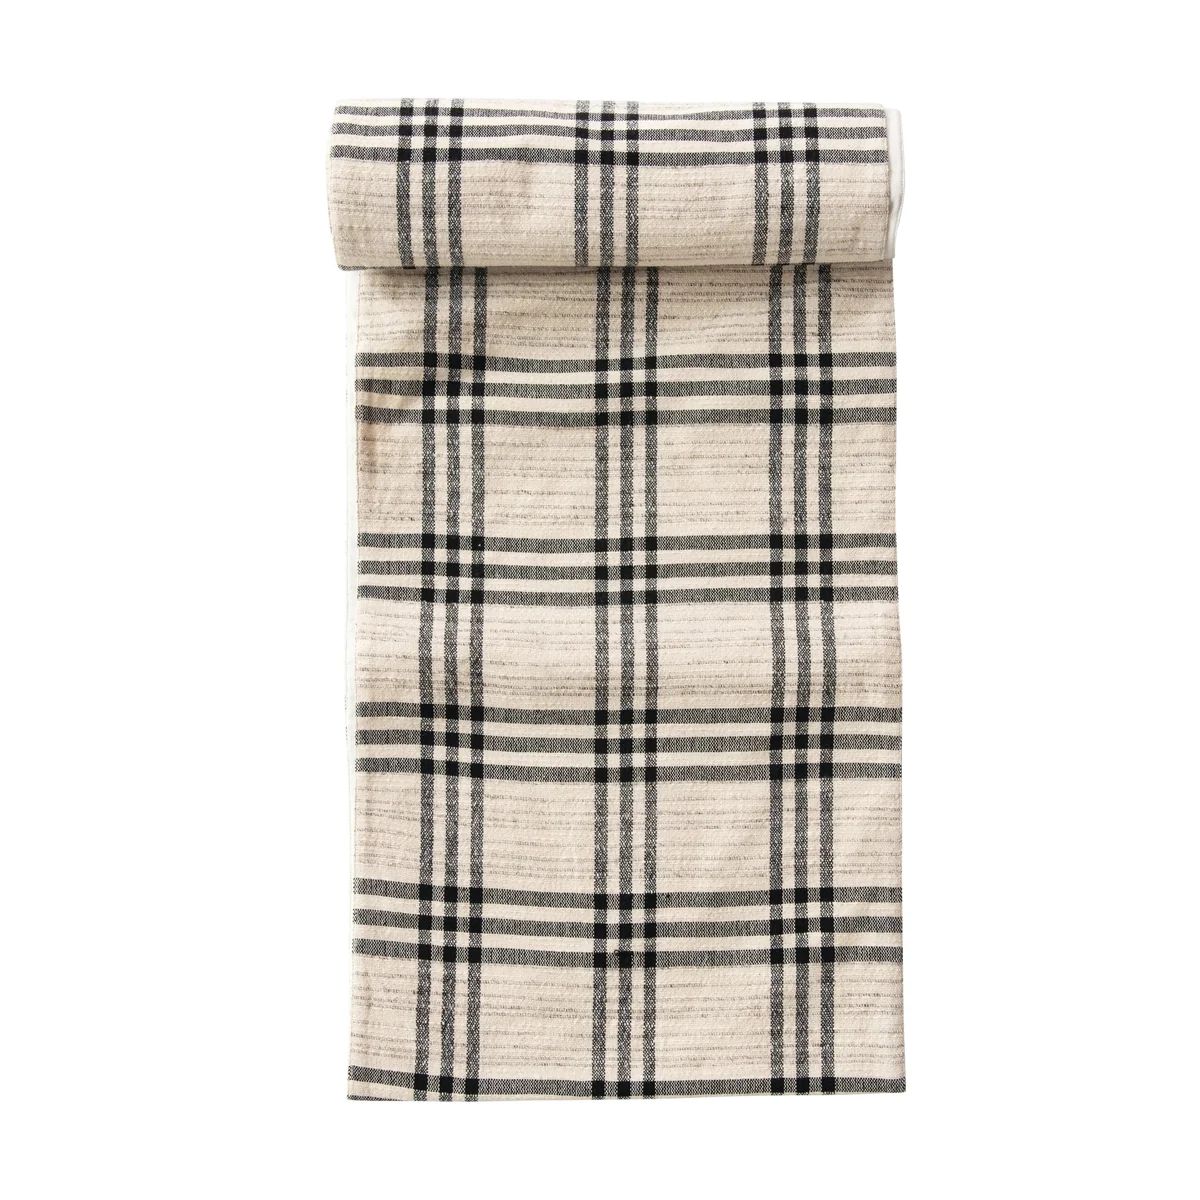 Woven Wool Blend Plaid Table Runner | APIARY by The Busy Bee